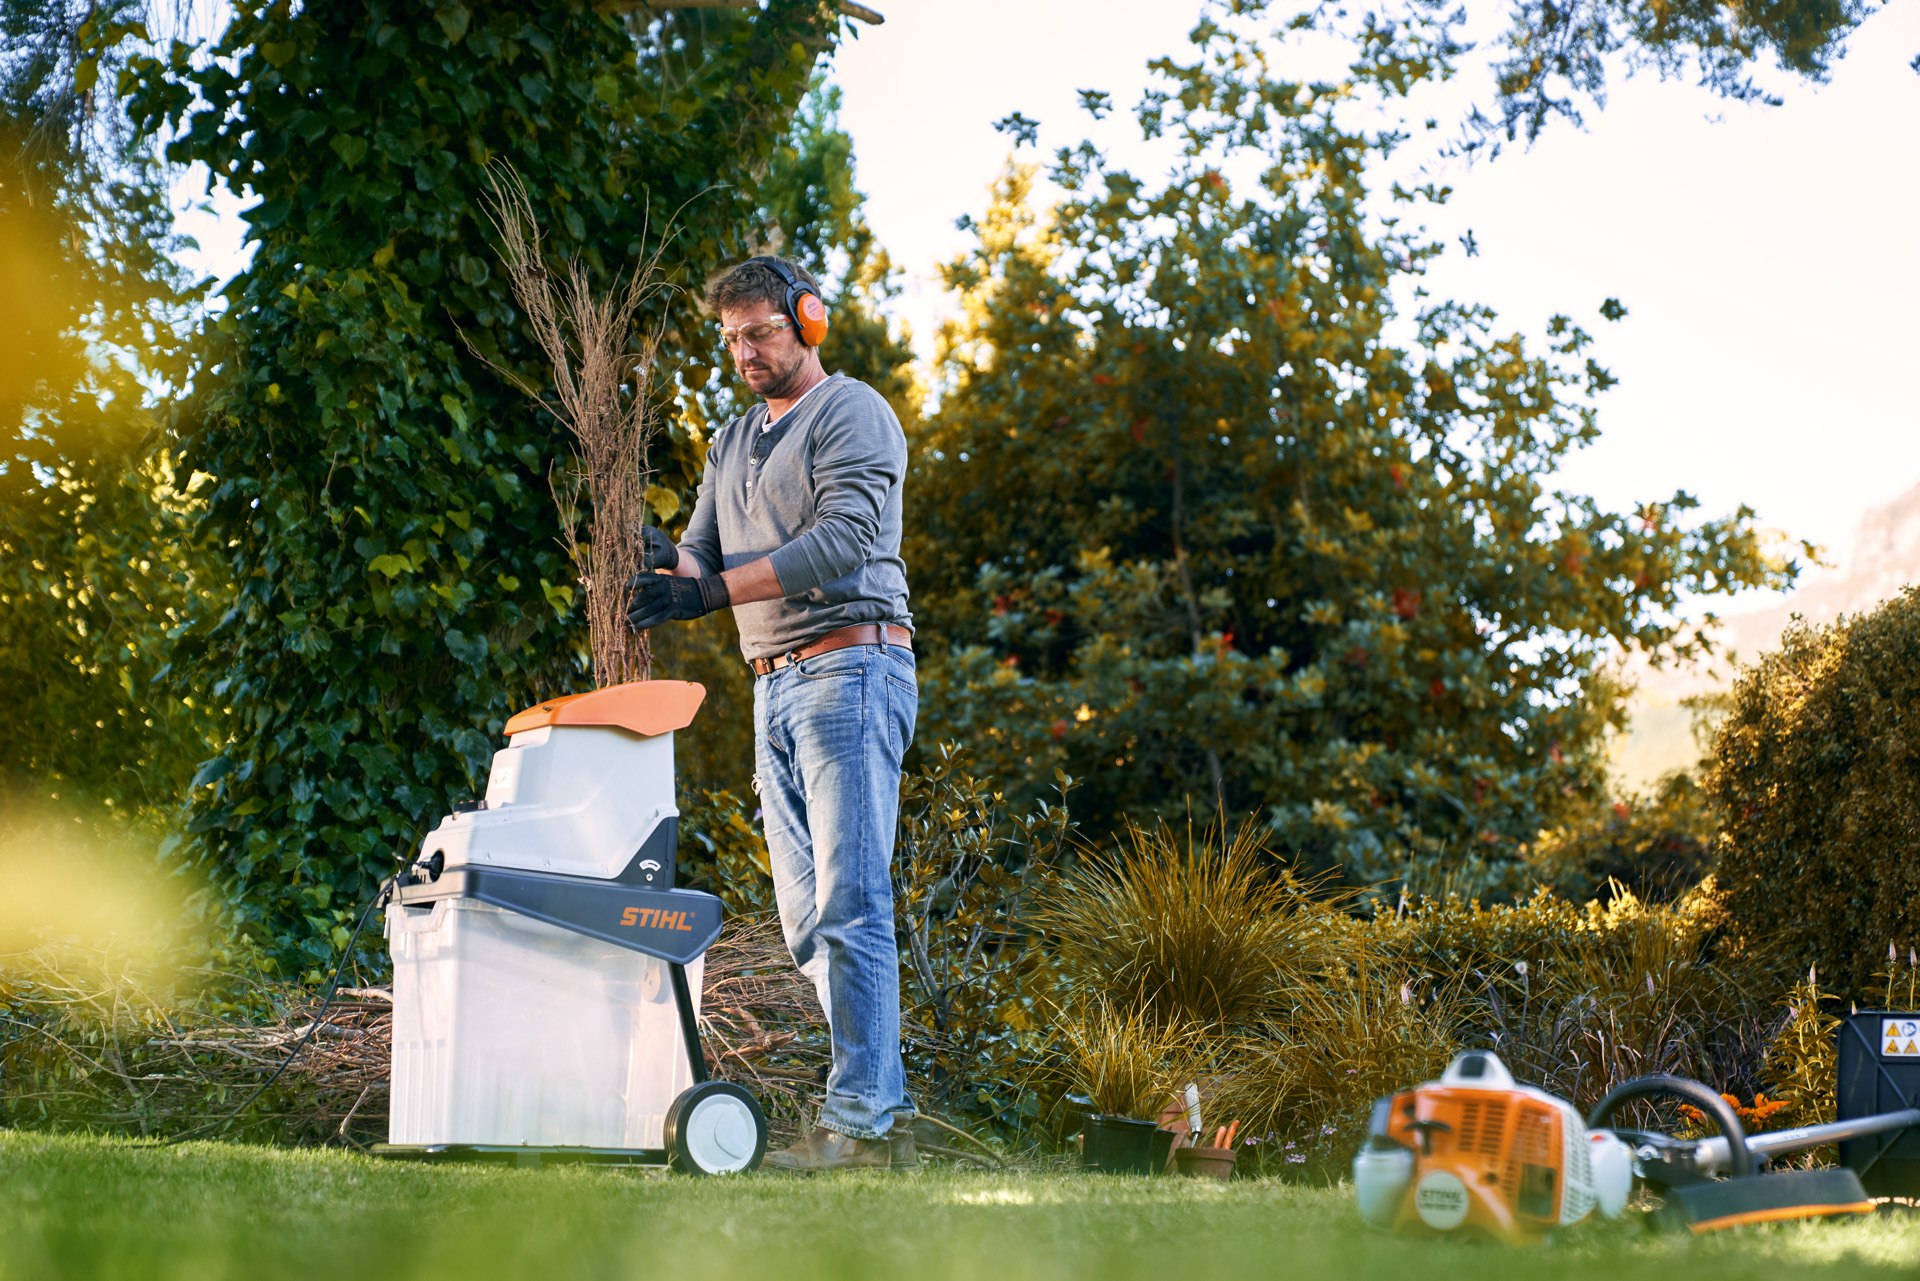 A man wearing ear protection using a STIHL GHE 140 electric shredder in a garden